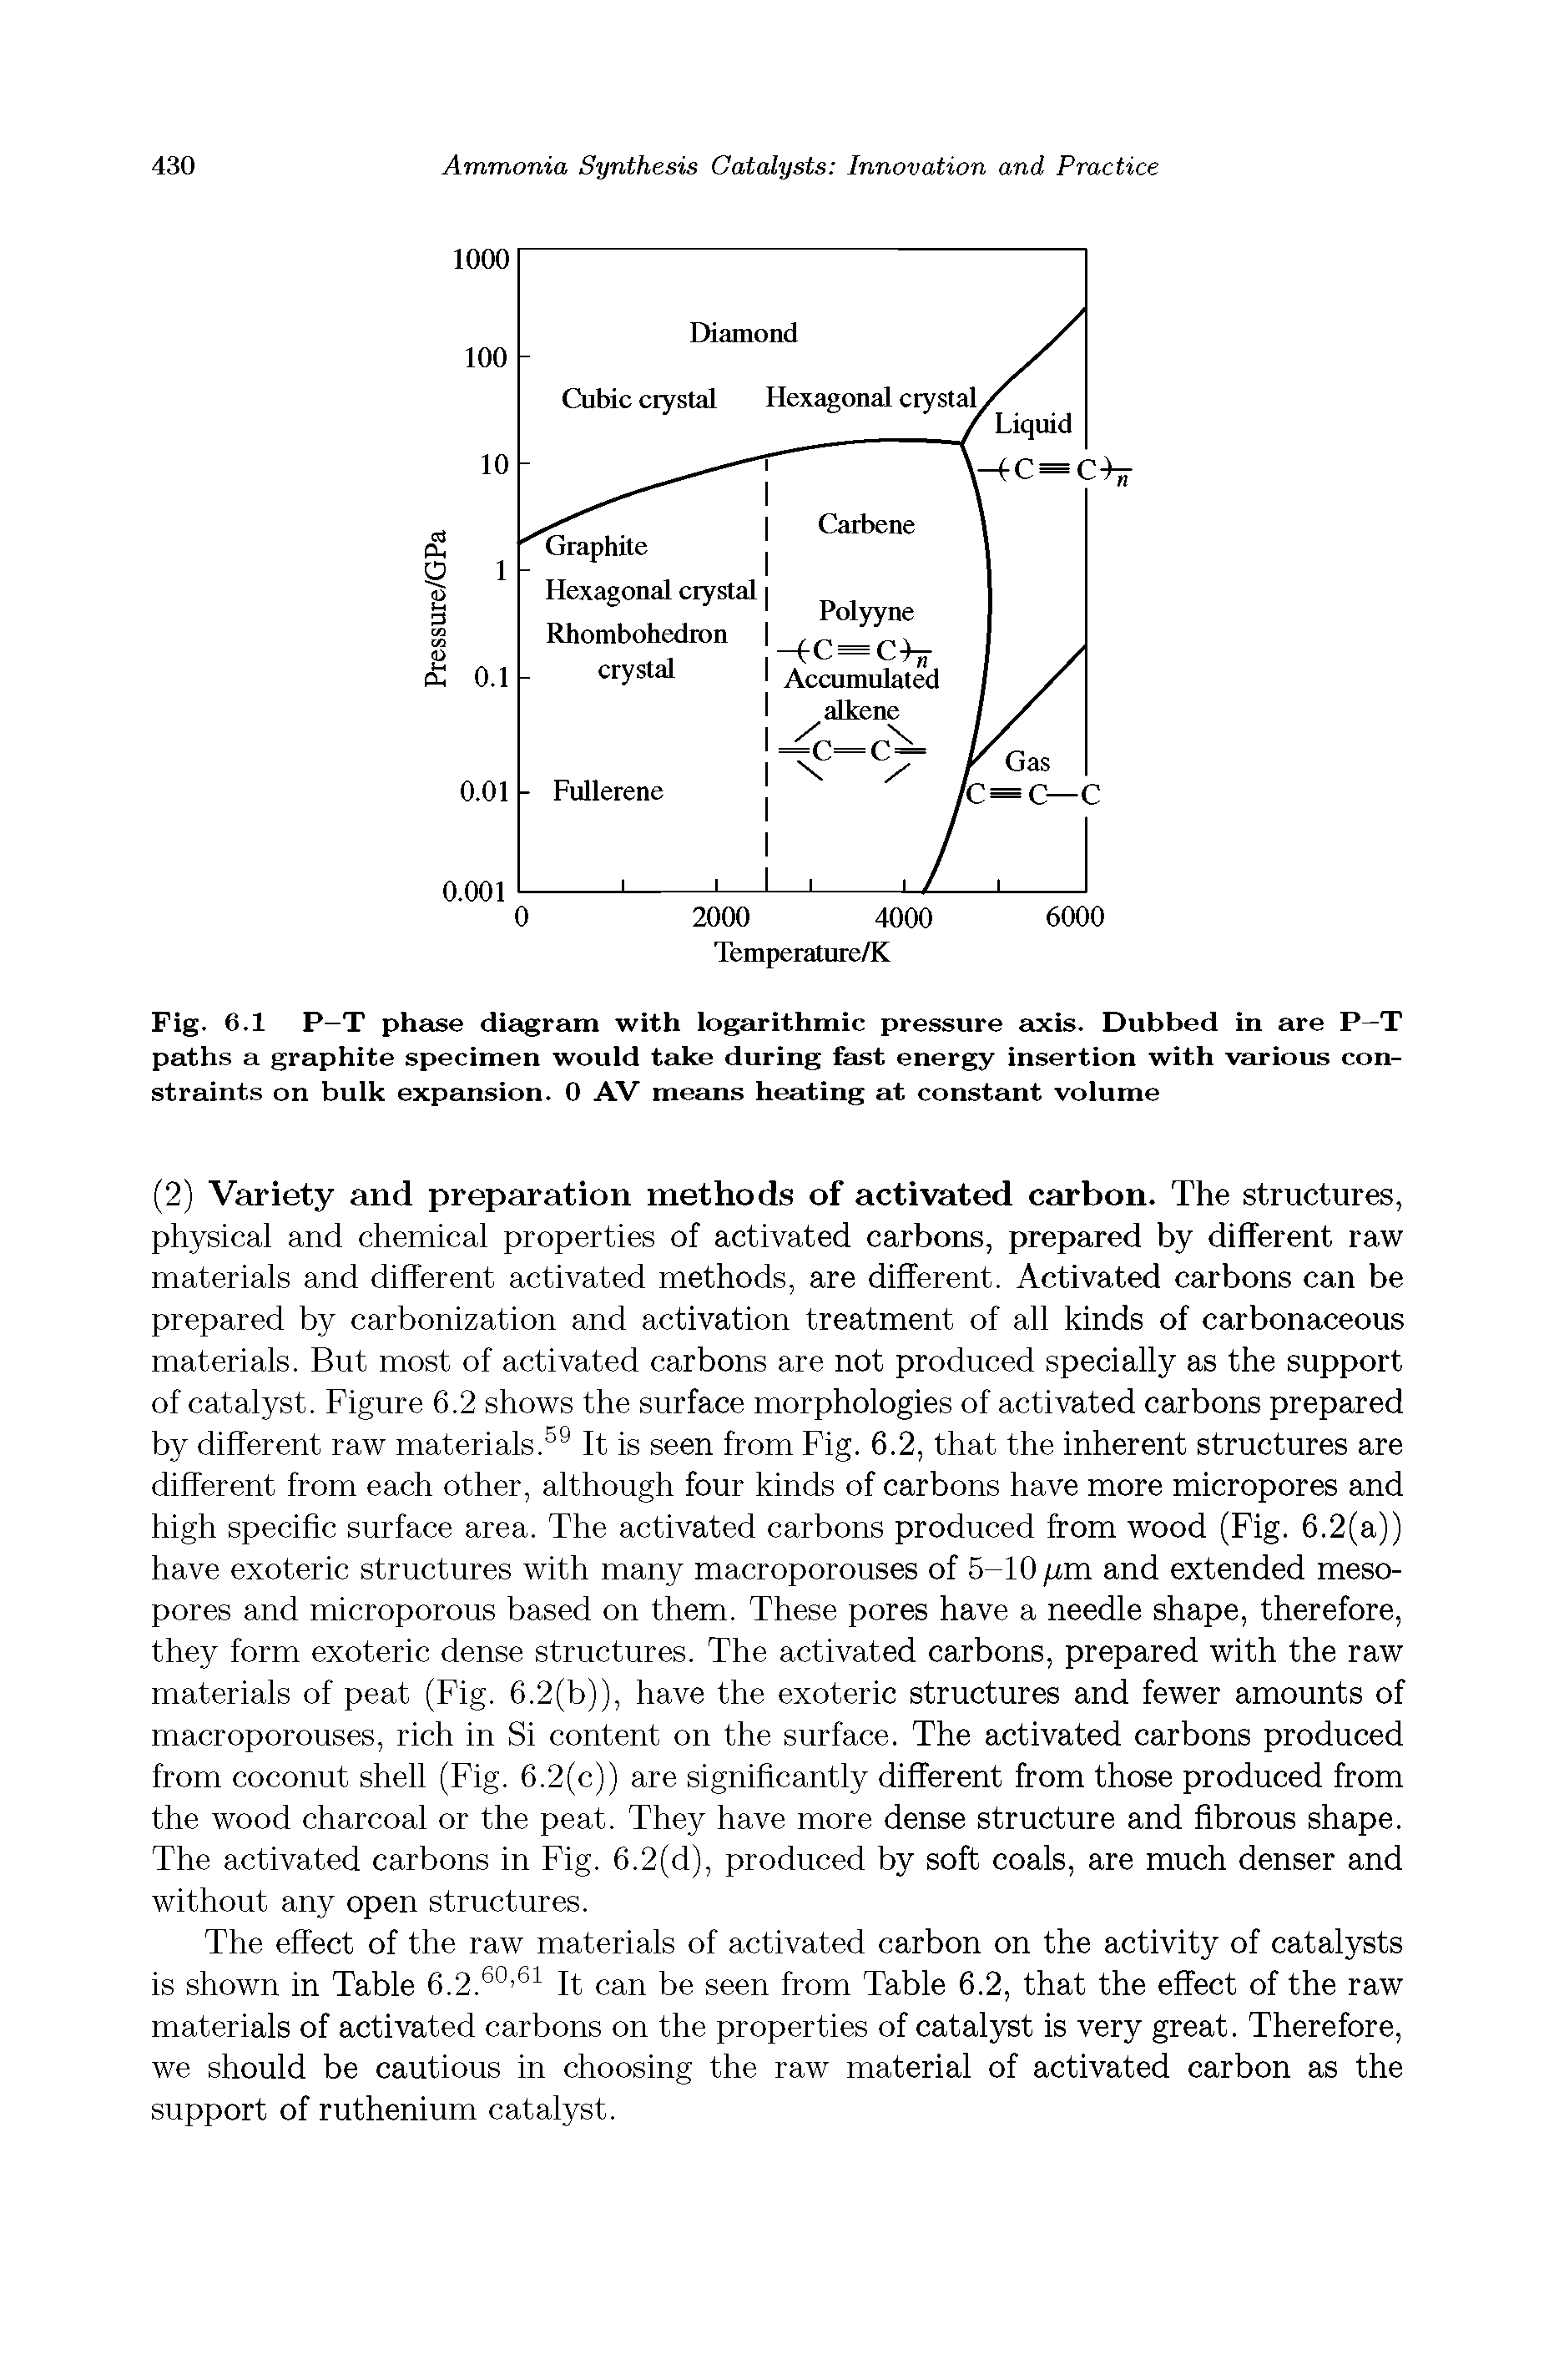 Fig. 6.1 P-T pheise diagram with logarithmic pressure axis. Dubbed in are P—T paths a graphite specimen would take during fEist energy insertion with various constraints on buik expansion. 0 AV means heating at constant volume...